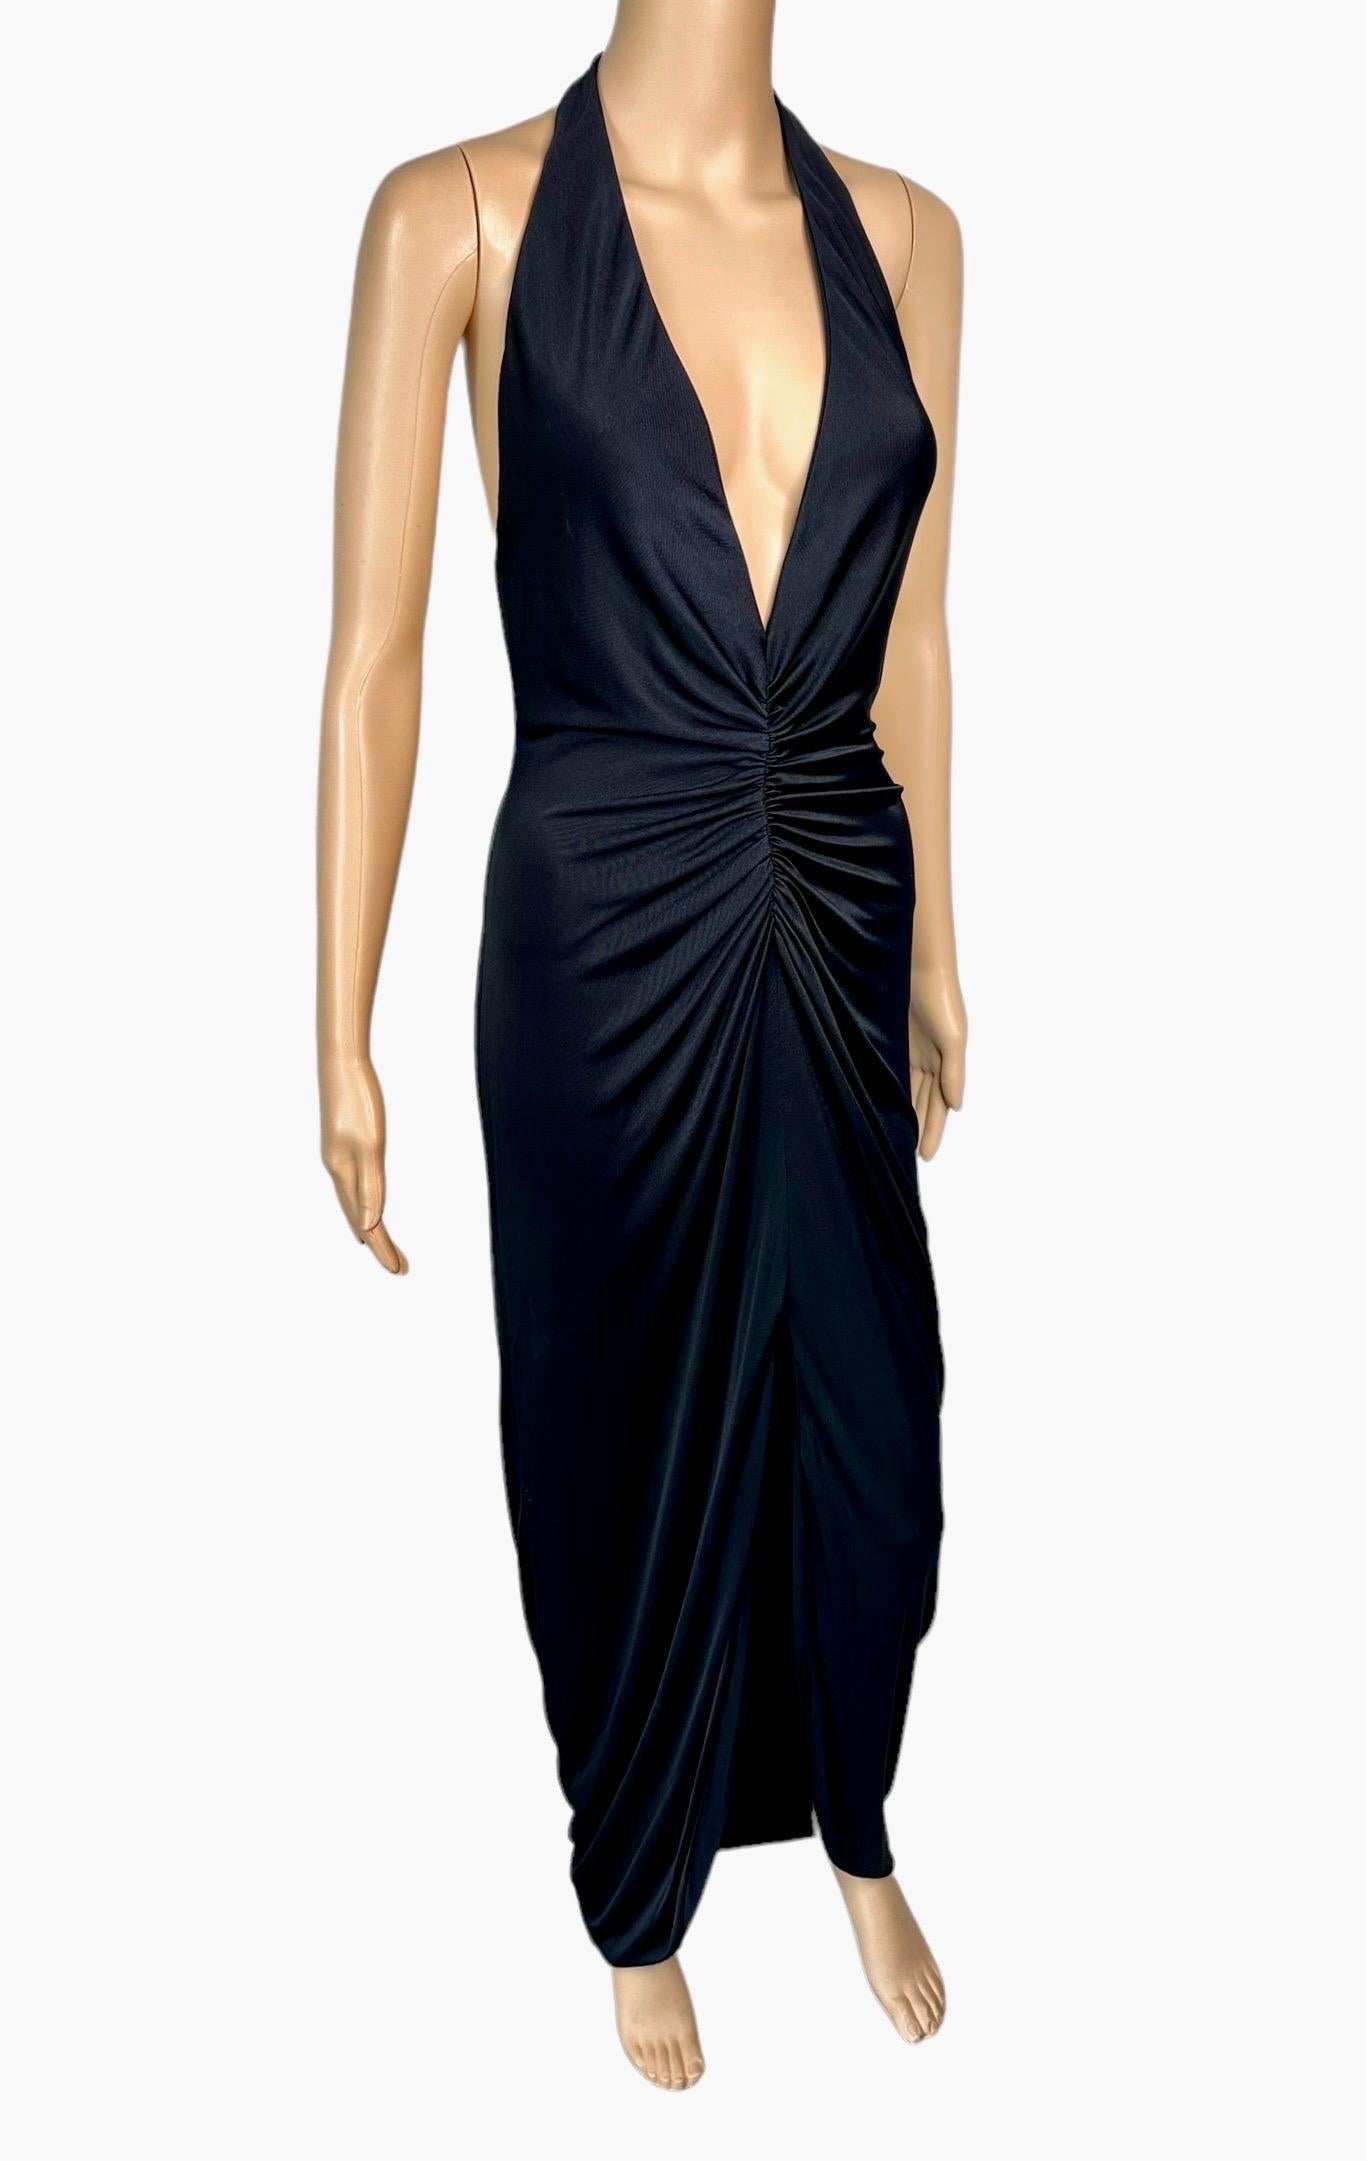 Women's Versace S/S 2005 Runway Plunging Hi-Low Ruched Open Back Evening Dress Gown